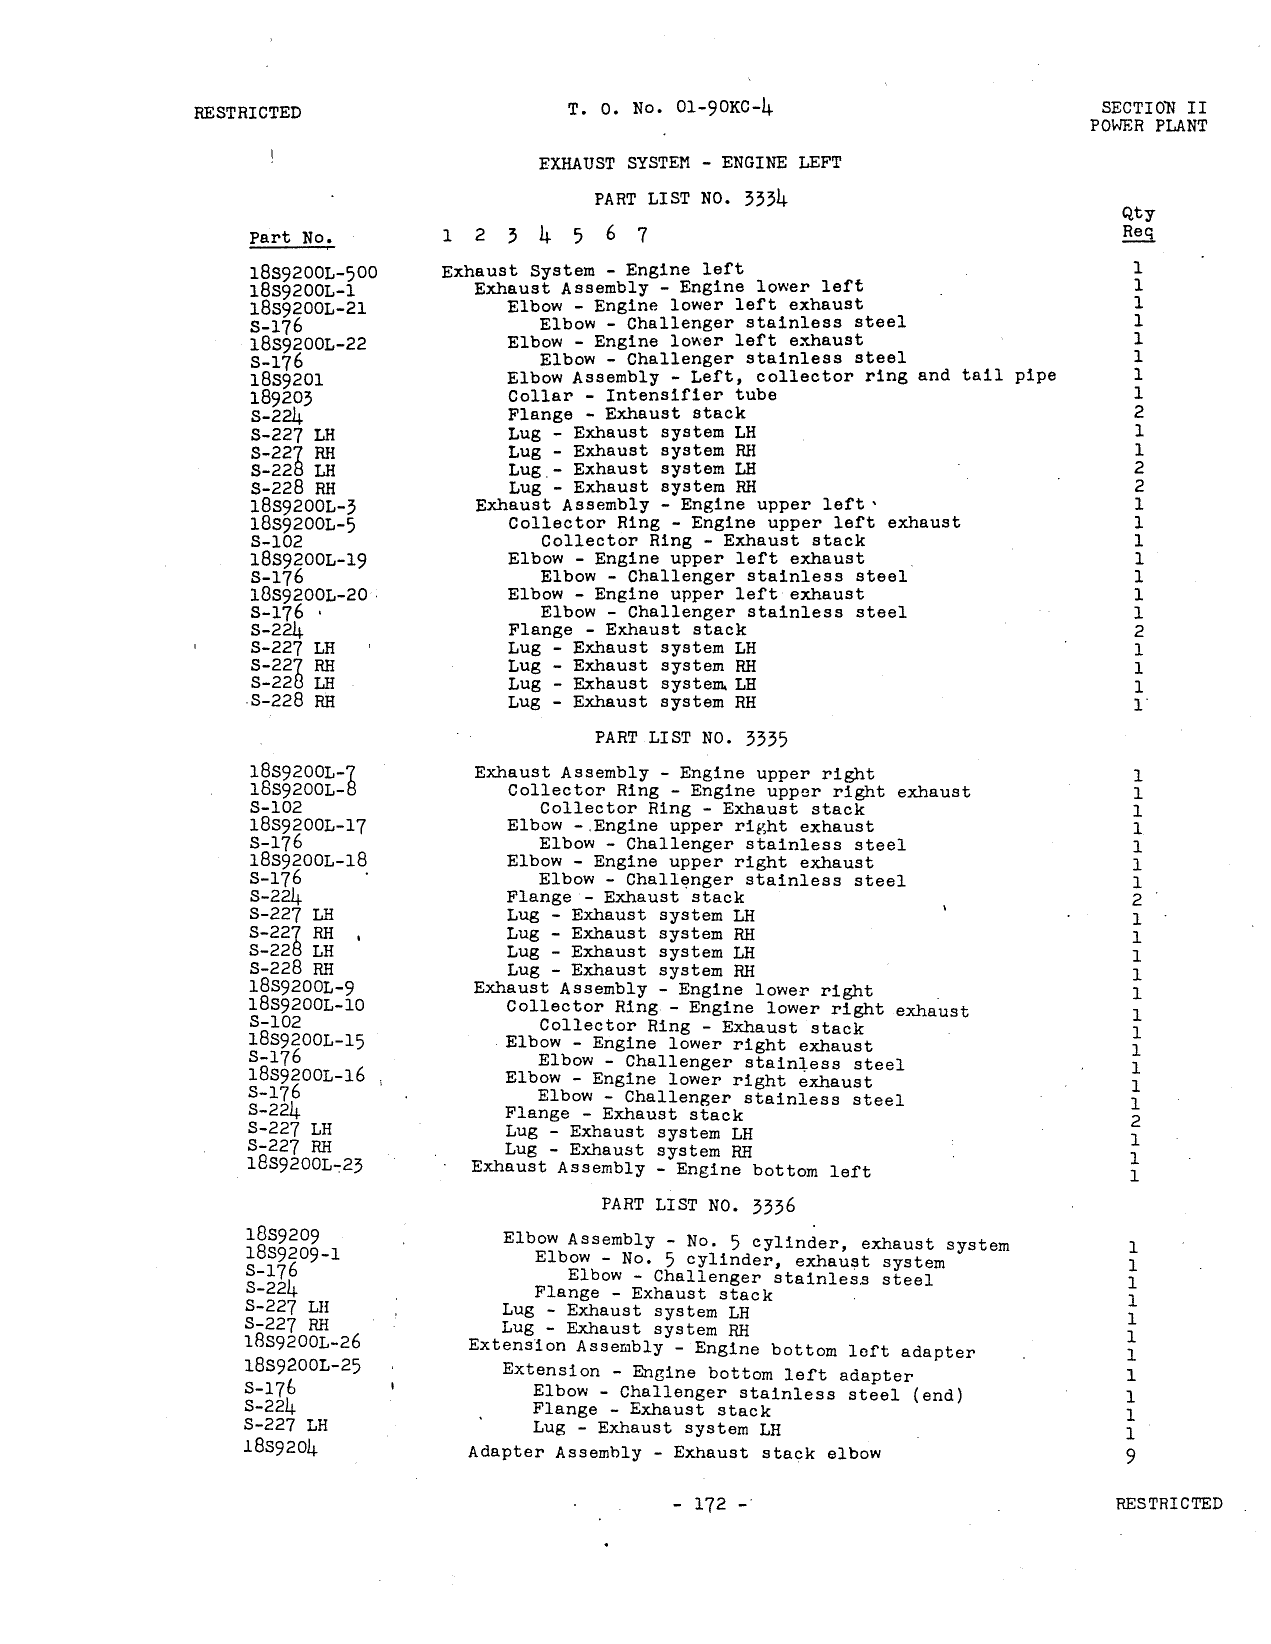 Sample page 177 from AirCorps Library document: Parts Catalog - AT-11